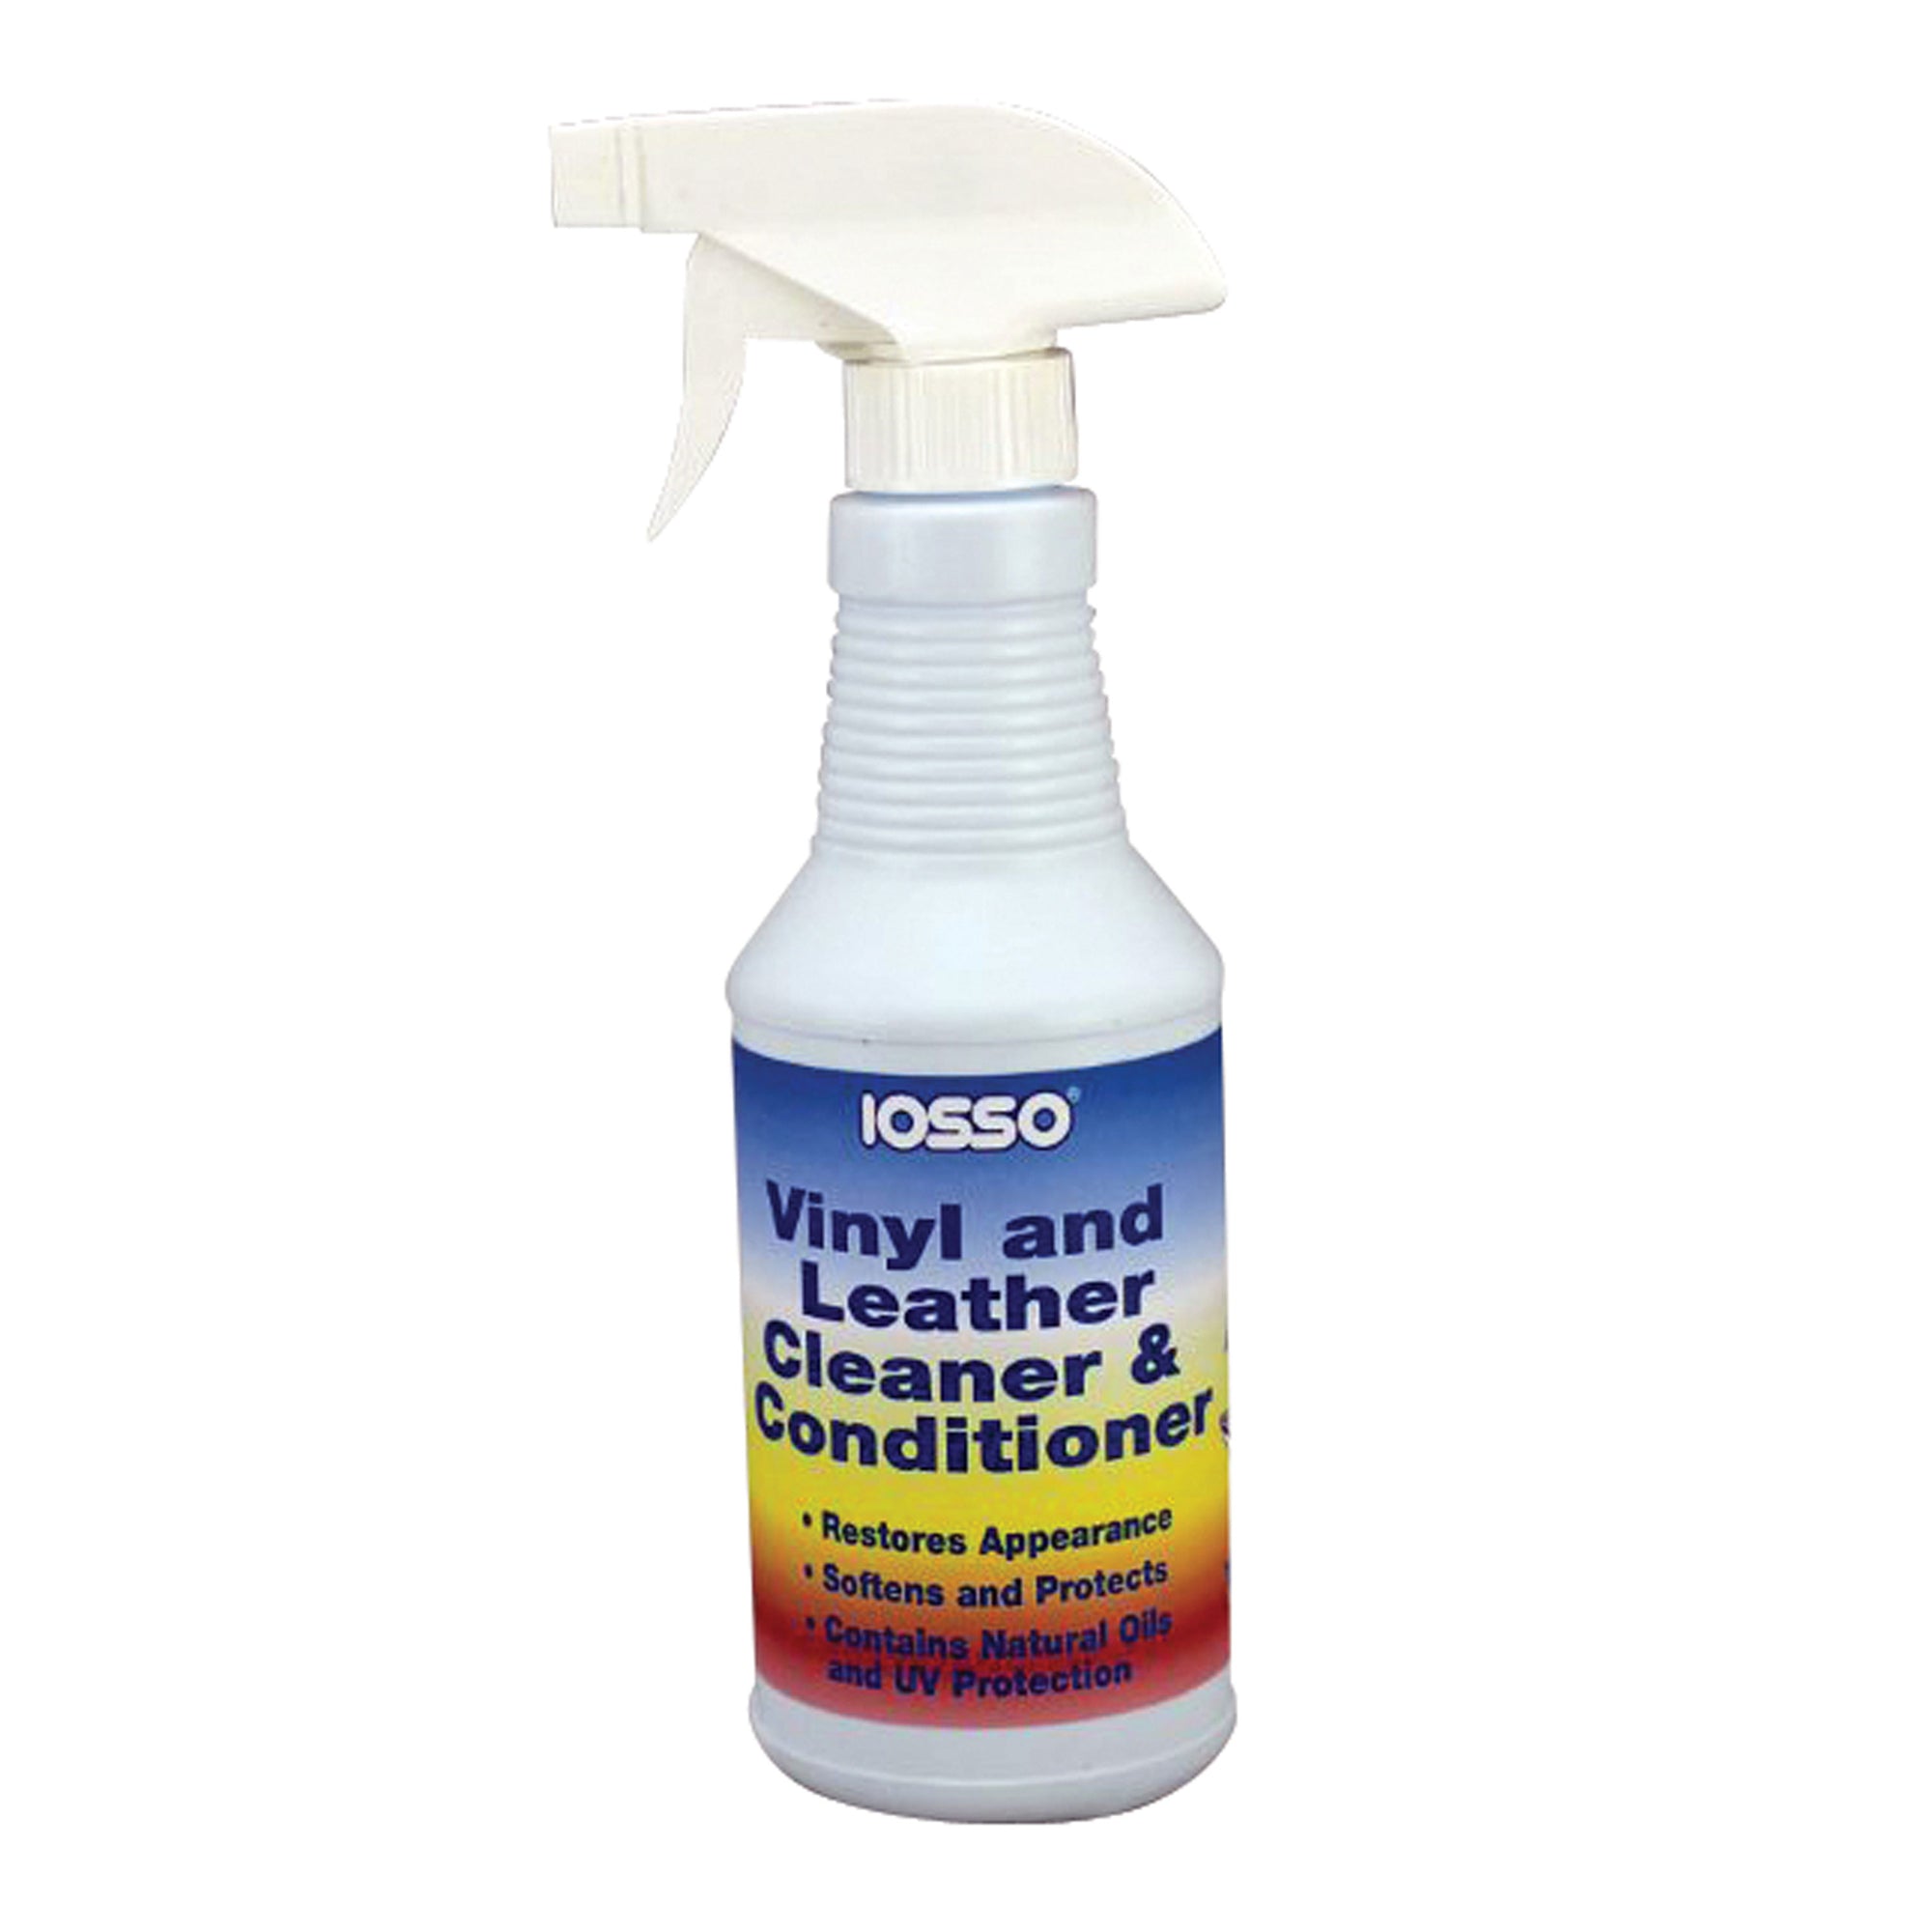 Iosso 10119 Vinyl and Leather Cleaner and Conditioner - 16 oz.